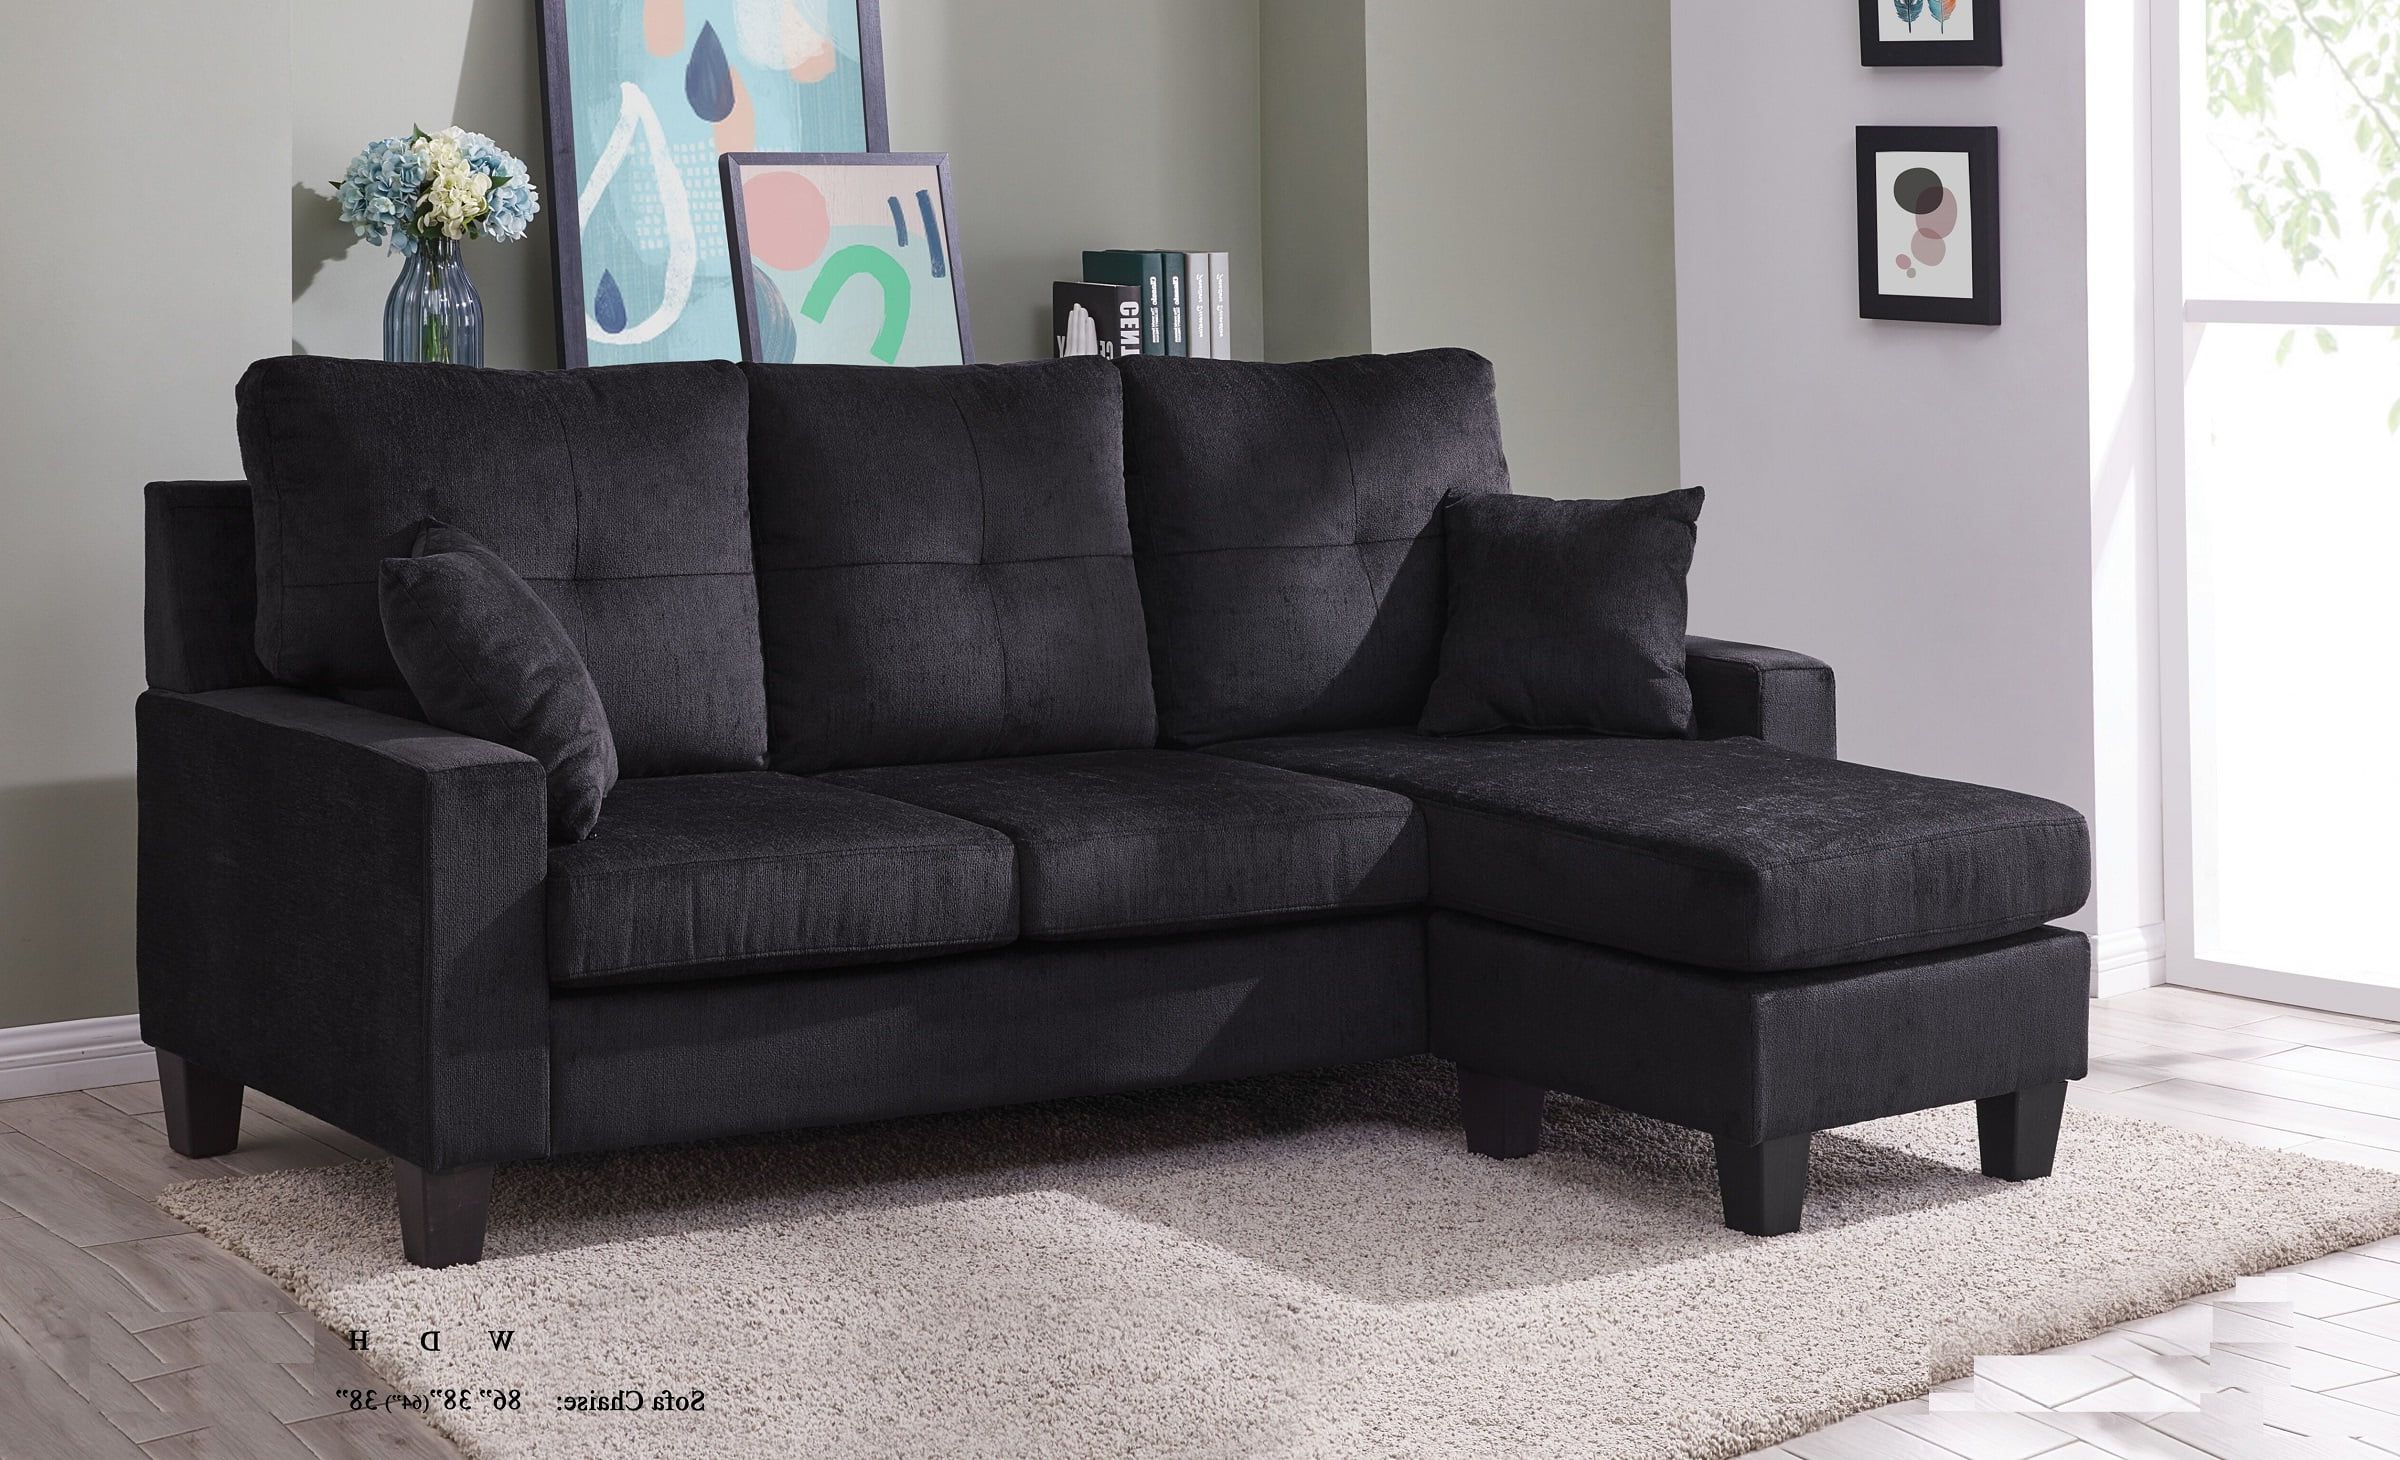 Sectional Sofa Set Black Fabric Tufted Cushion Sofa Chaise Small Space Throughout Sofas For Compact Living (View 17 of 20)